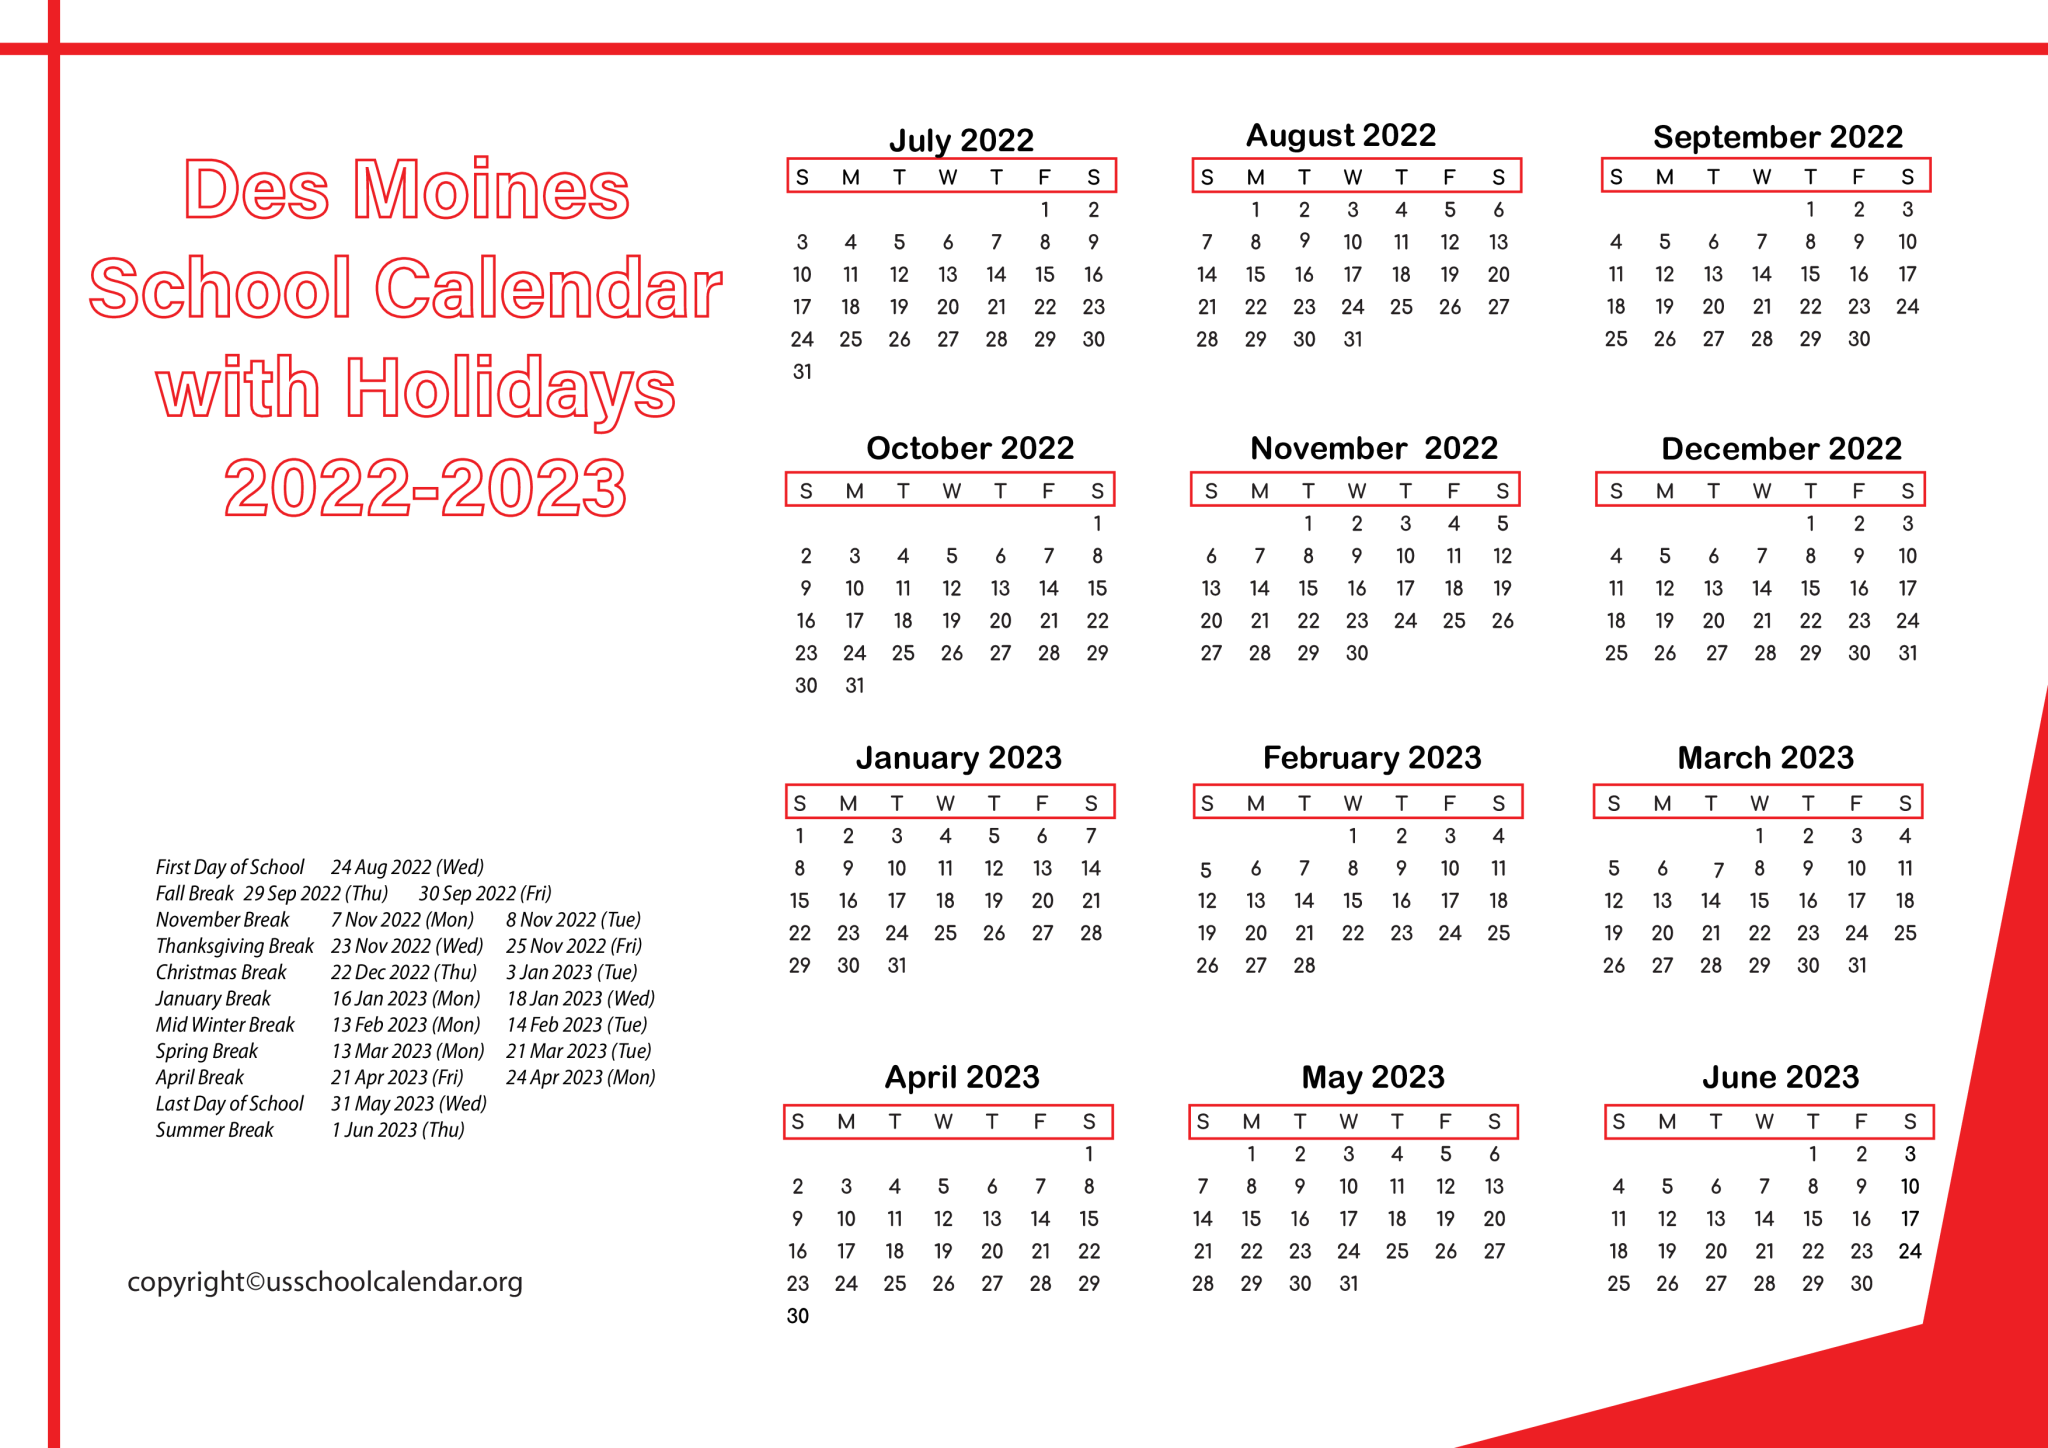 dms-des-moines-school-calendar-with-holidays-2022-2023